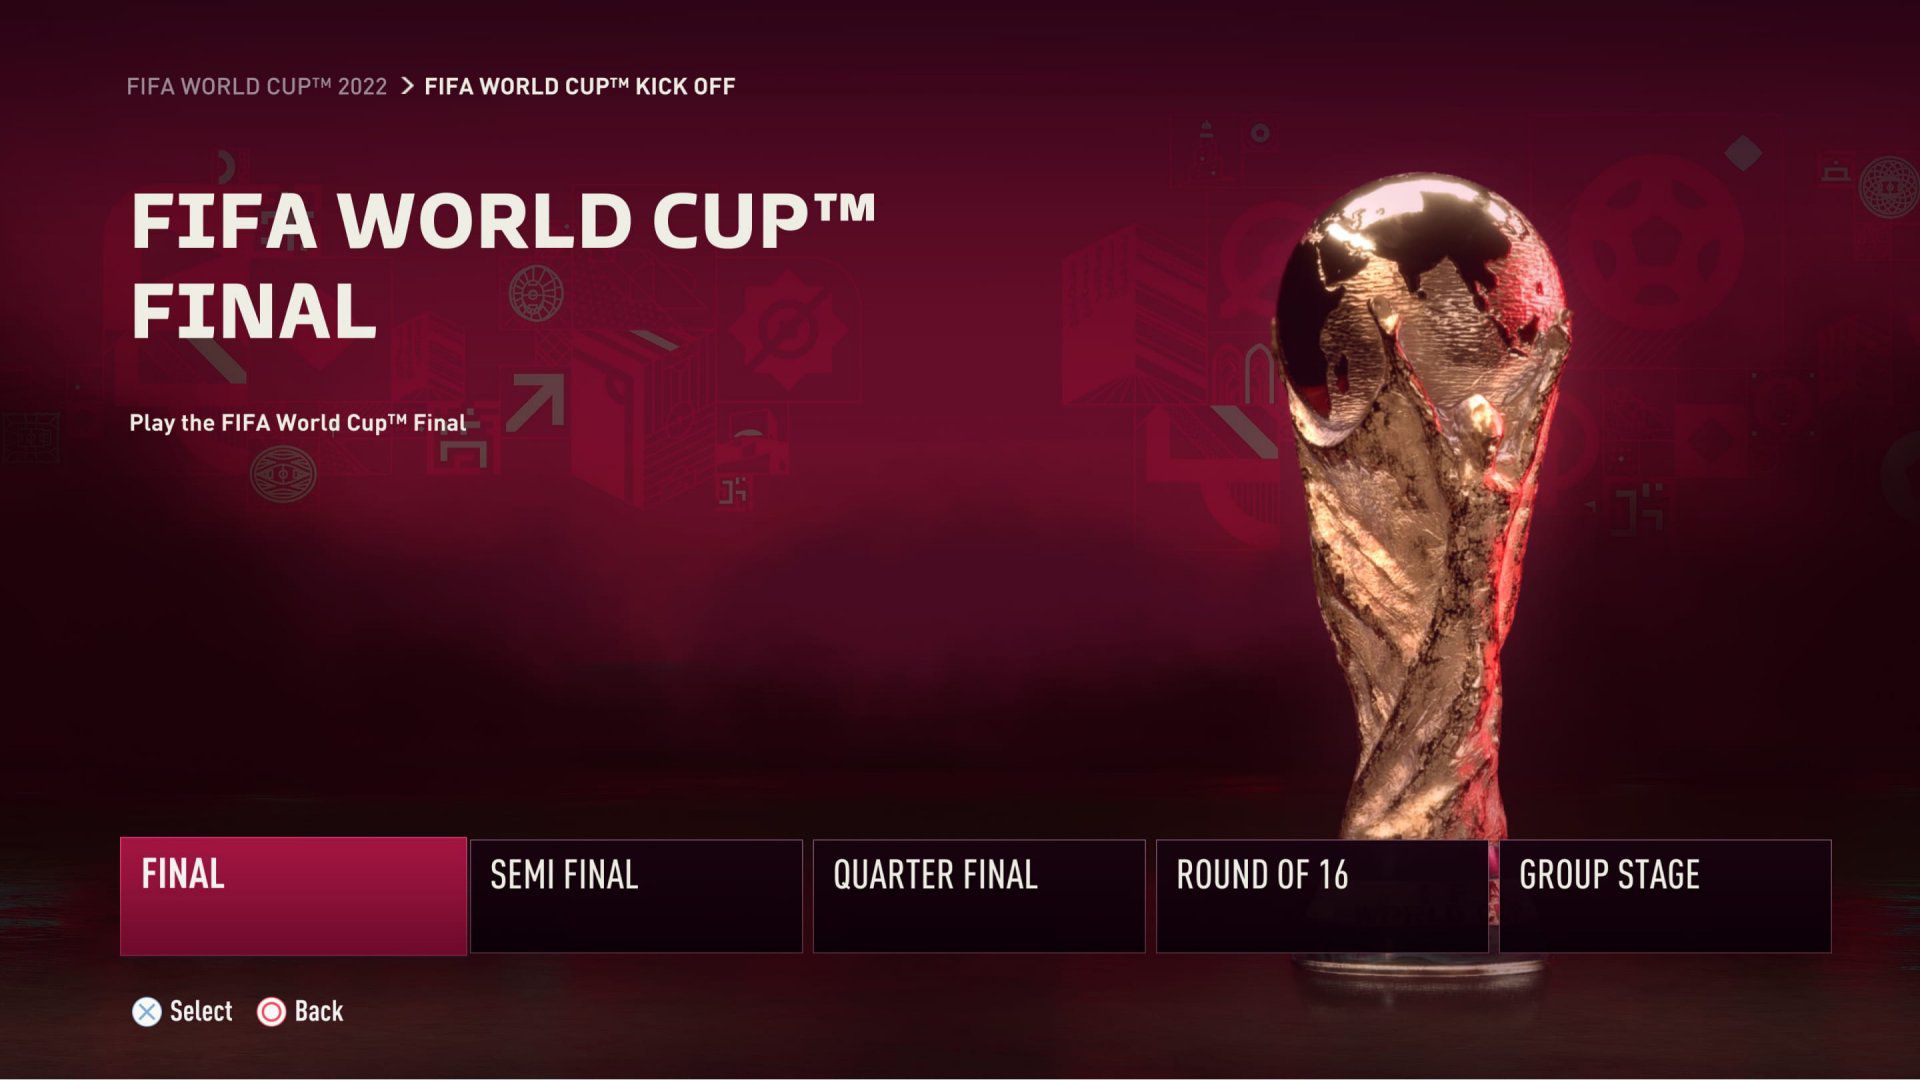 There will be 4 dedicated World Cup game modes in FIFA 23